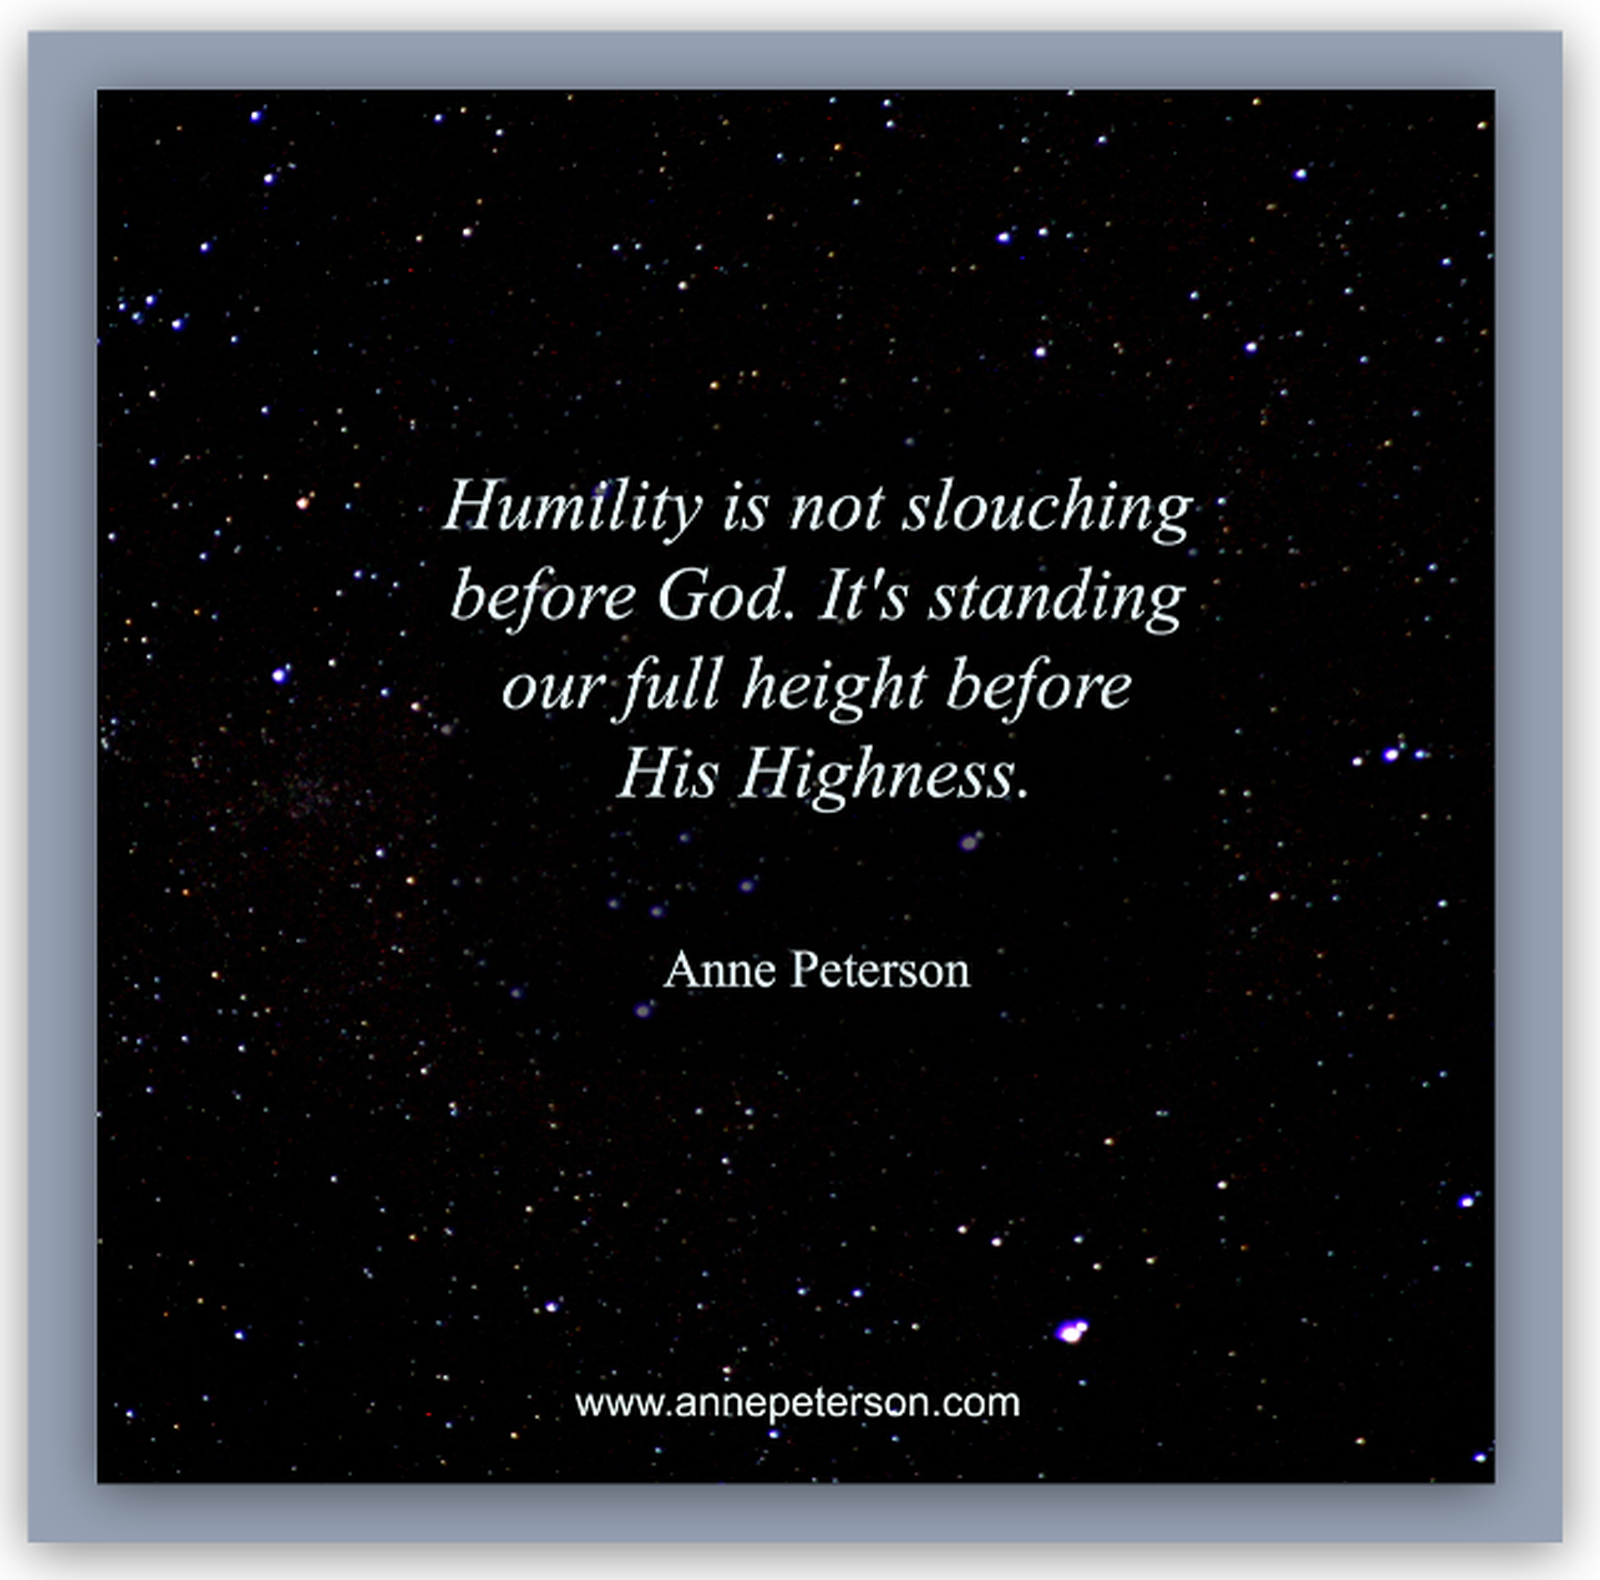 graphic about humility by Anne Peterson